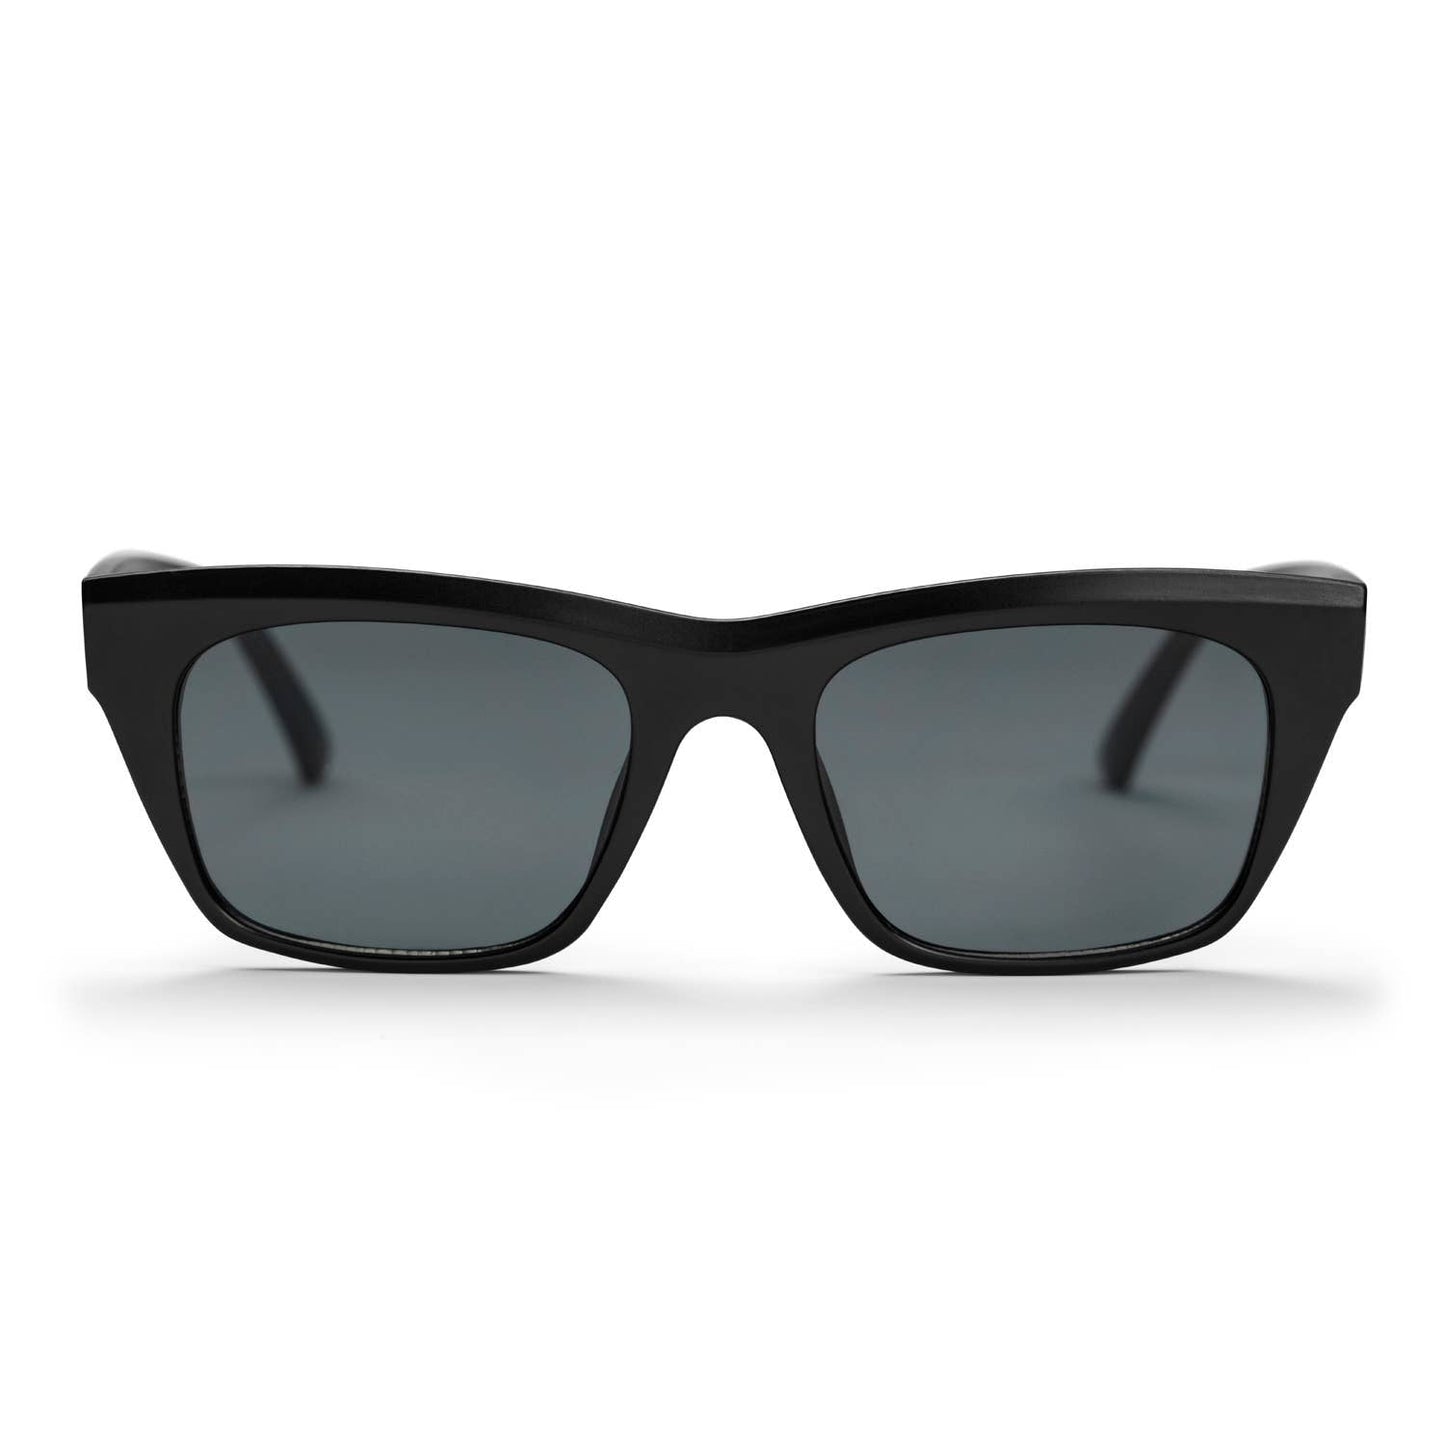 Guelas Tortoise Recycled Sunglasses